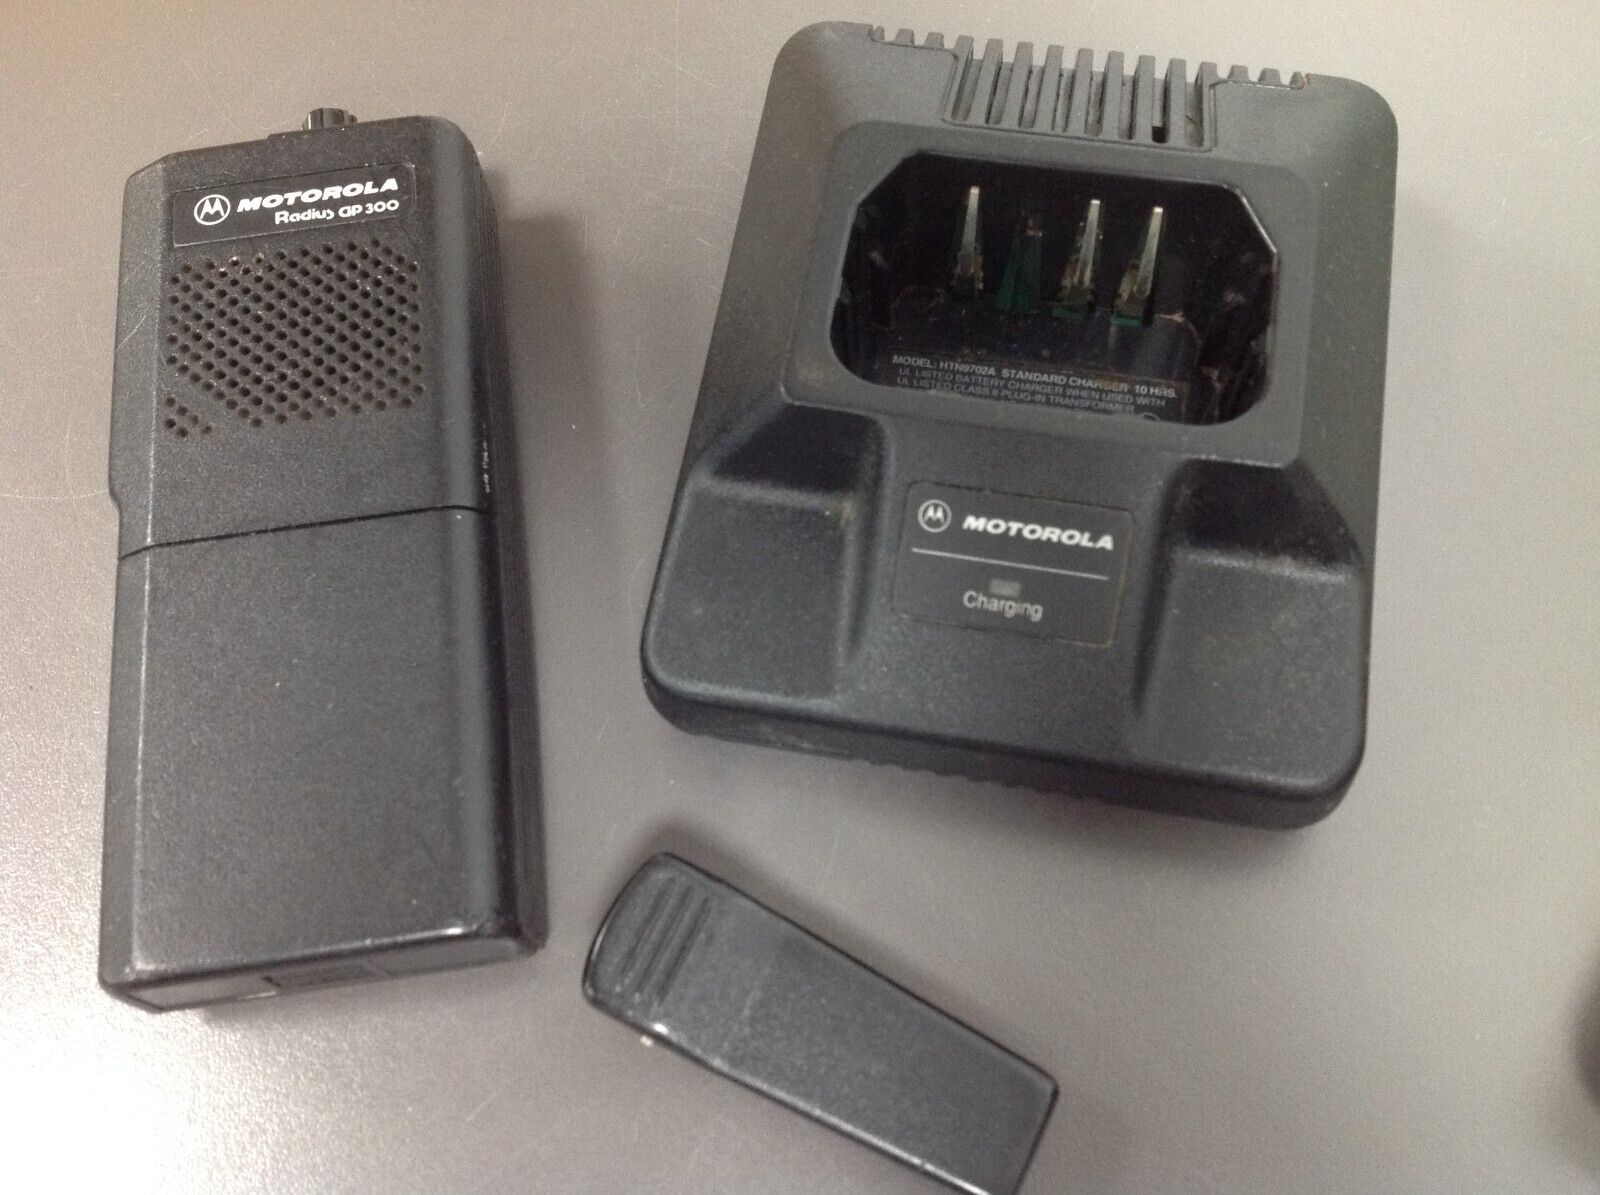 Motorola Radius GP300, VHF 136-174 MHz, 16 CH, Charger, No Power UNTESTED. Available Now for $45.00